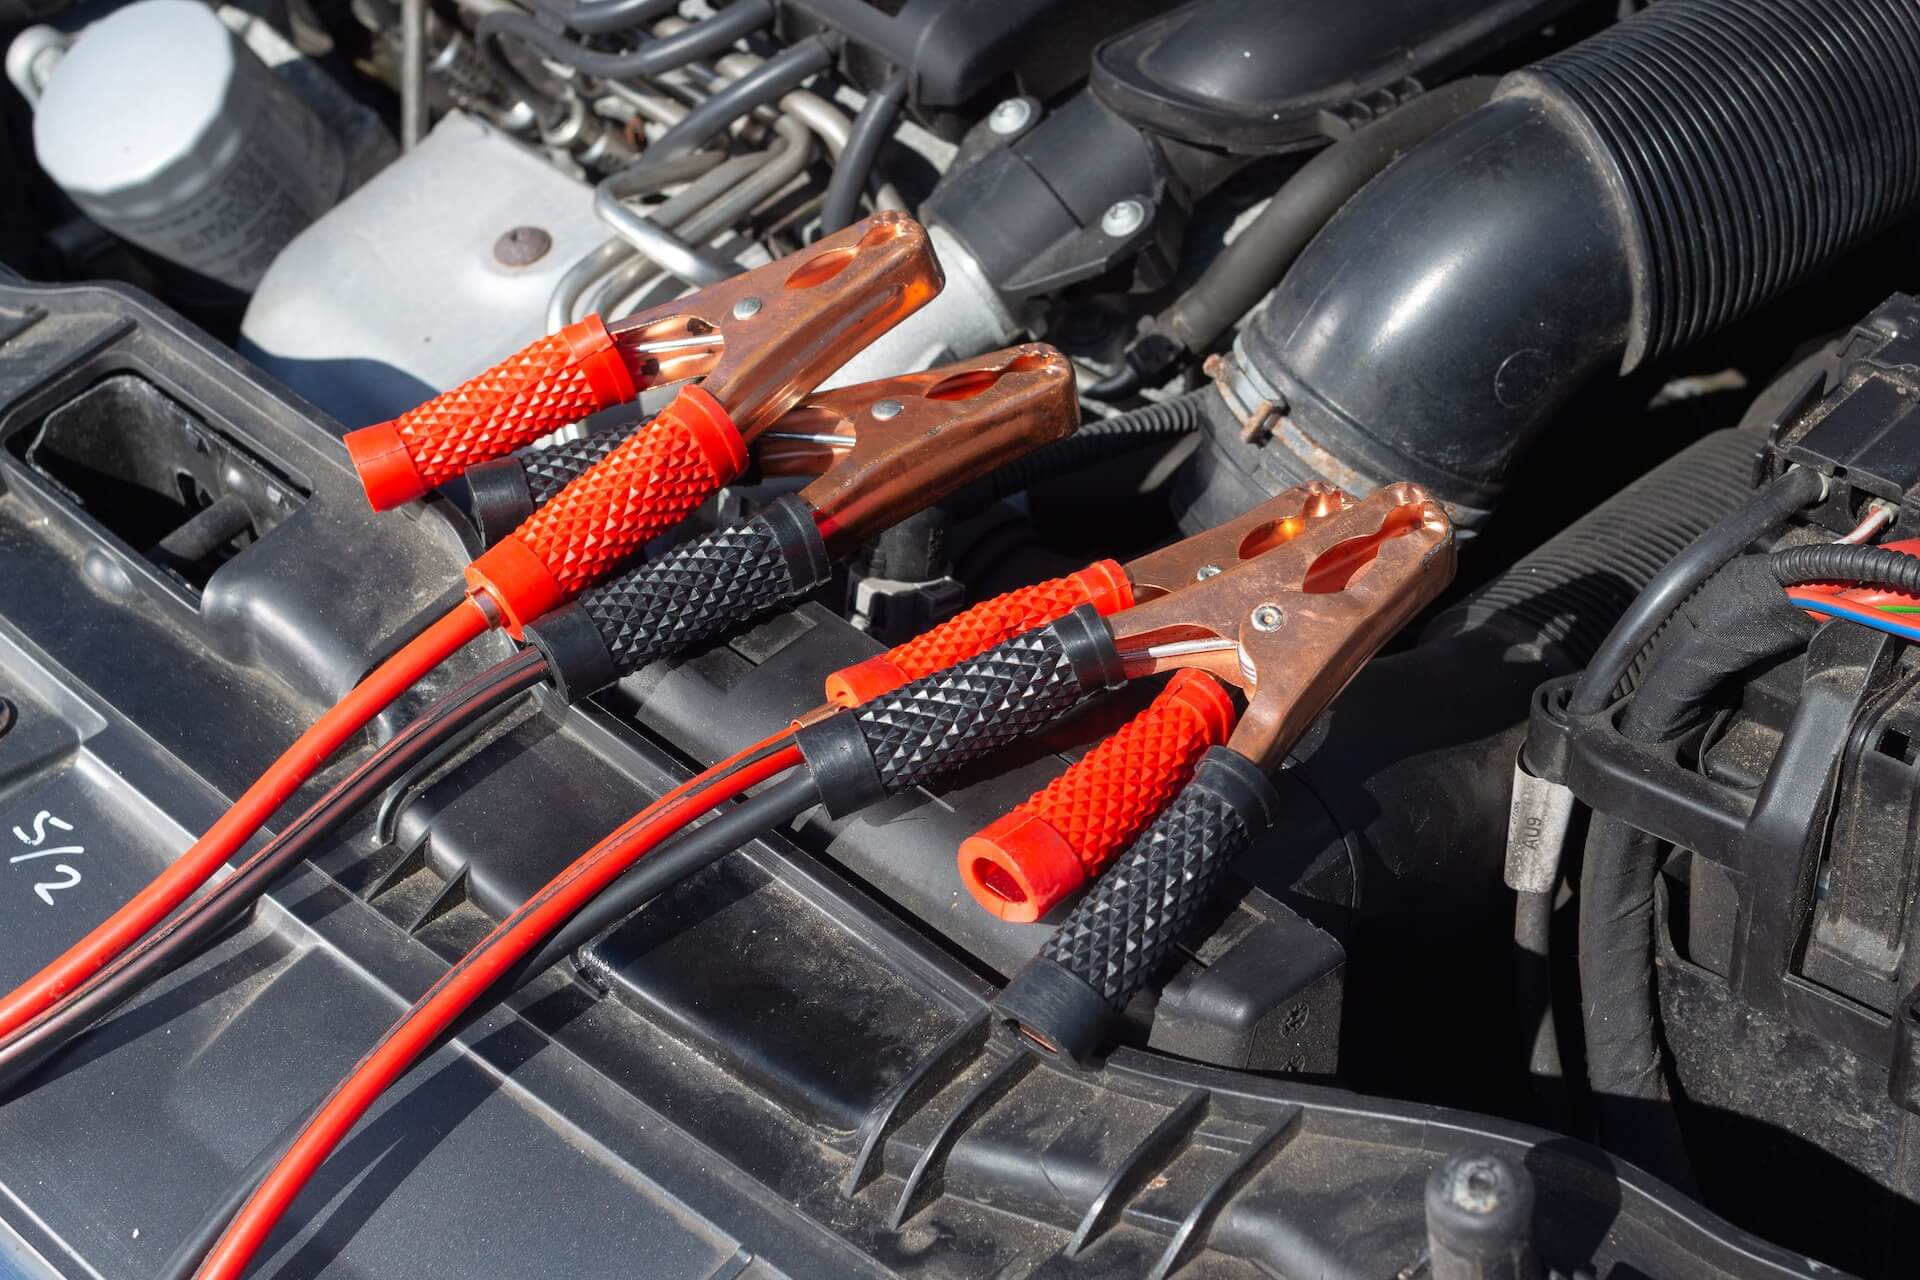 Jumper cables in a car